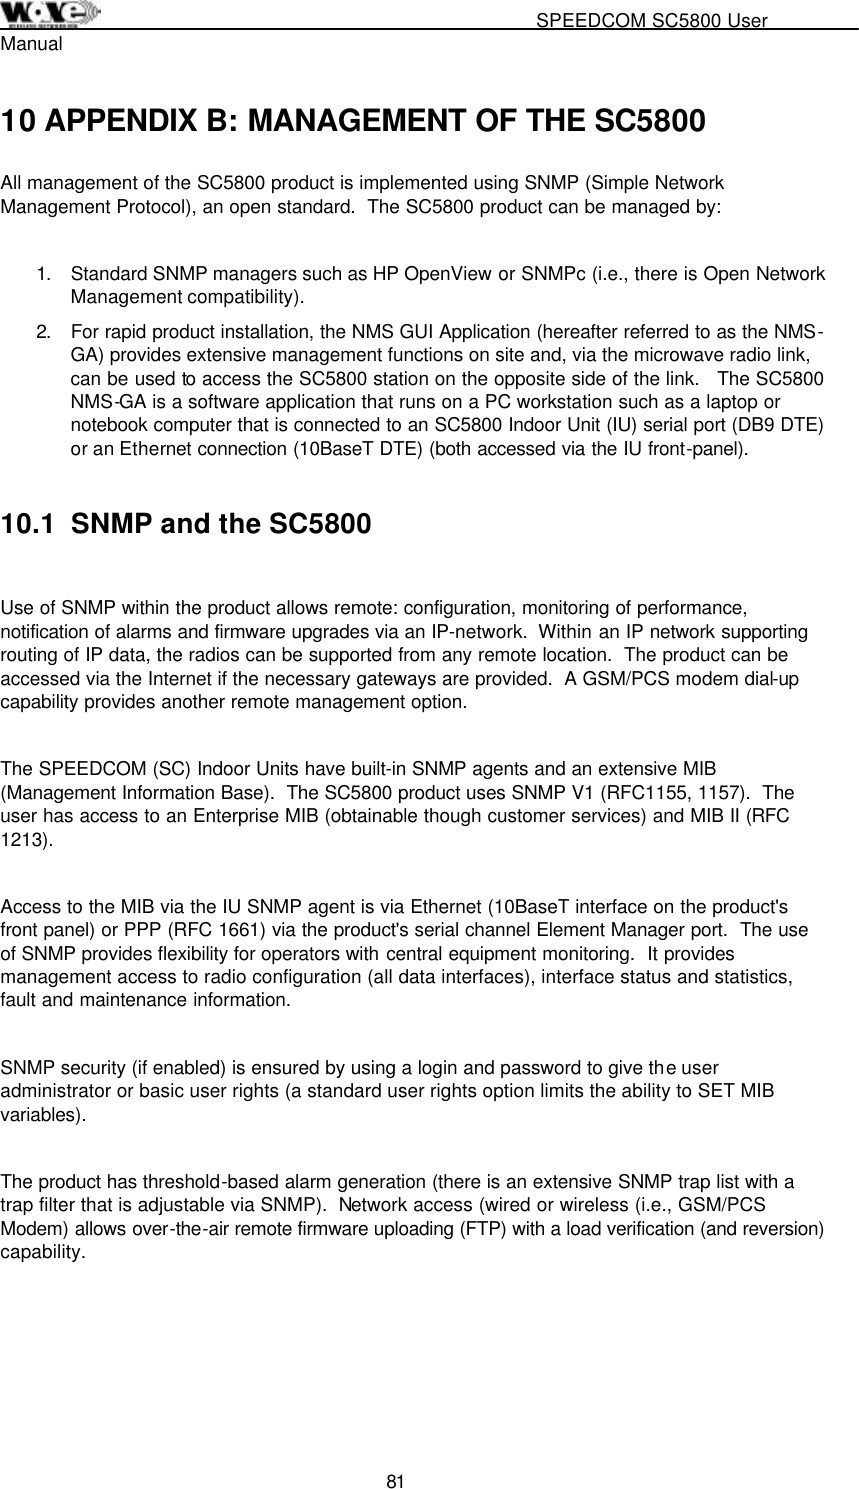                                                   SPEEDCOM SC5800 User Manual  81 10 APPENDIX B: MANAGEMENT OF THE SC5800 All management of the SC5800 product is implemented using SNMP (Simple Network Management Protocol), an open standard.  The SC5800 product can be managed by:   1.  Standard SNMP managers such as HP OpenView or SNMPc (i.e., there is Open Network Management compatibility).  2.  For rapid product installation, the NMS GUI Application (hereafter referred to as the NMS-GA) provides extensive management functions on site and, via the microwave radio link, can be used to access the SC5800 station on the opposite side of the link.   The SC5800 NMS-GA is a software application that runs on a PC workstation such as a laptop or notebook computer that is connected to an SC5800 Indoor Unit (IU) serial port (DB9 DTE) or an Ethernet connection (10BaseT DTE) (both accessed via the IU front-panel).    10.1  SNMP and the SC5800  Use of SNMP within the product allows remote: configuration, monitoring of performance, notification of alarms and firmware upgrades via an IP-network.  Within an IP network supporting routing of IP data, the radios can be supported from any remote location.  The product can be accessed via the Internet if the necessary gateways are provided.  A GSM/PCS modem dial-up capability provides another remote management option.    The SPEEDCOM (SC) Indoor Units have built-in SNMP agents and an extensive MIB (Management Information Base).  The SC5800 product uses SNMP V1 (RFC1155, 1157).  The user has access to an Enterprise MIB (obtainable though customer services) and MIB II (RFC 1213).     Access to the MIB via the IU SNMP agent is via Ethernet (10BaseT interface on the product&apos;s front panel) or PPP (RFC 1661) via the product&apos;s serial channel Element Manager port.  The use of SNMP provides flexibility for operators with central equipment monitoring.  It provides management access to radio configuration (all data interfaces), interface status and statistics, fault and maintenance information.    SNMP security (if enabled) is ensured by using a login and password to give the user administrator or basic user rights (a standard user rights option limits the ability to SET MIB variables).    The product has threshold-based alarm generation (there is an extensive SNMP trap list with a trap filter that is adjustable via SNMP).  Network access (wired or wireless (i.e., GSM/PCS Modem) allows over-the-air remote firmware uploading (FTP) with a load verification (and reversion) capability.      